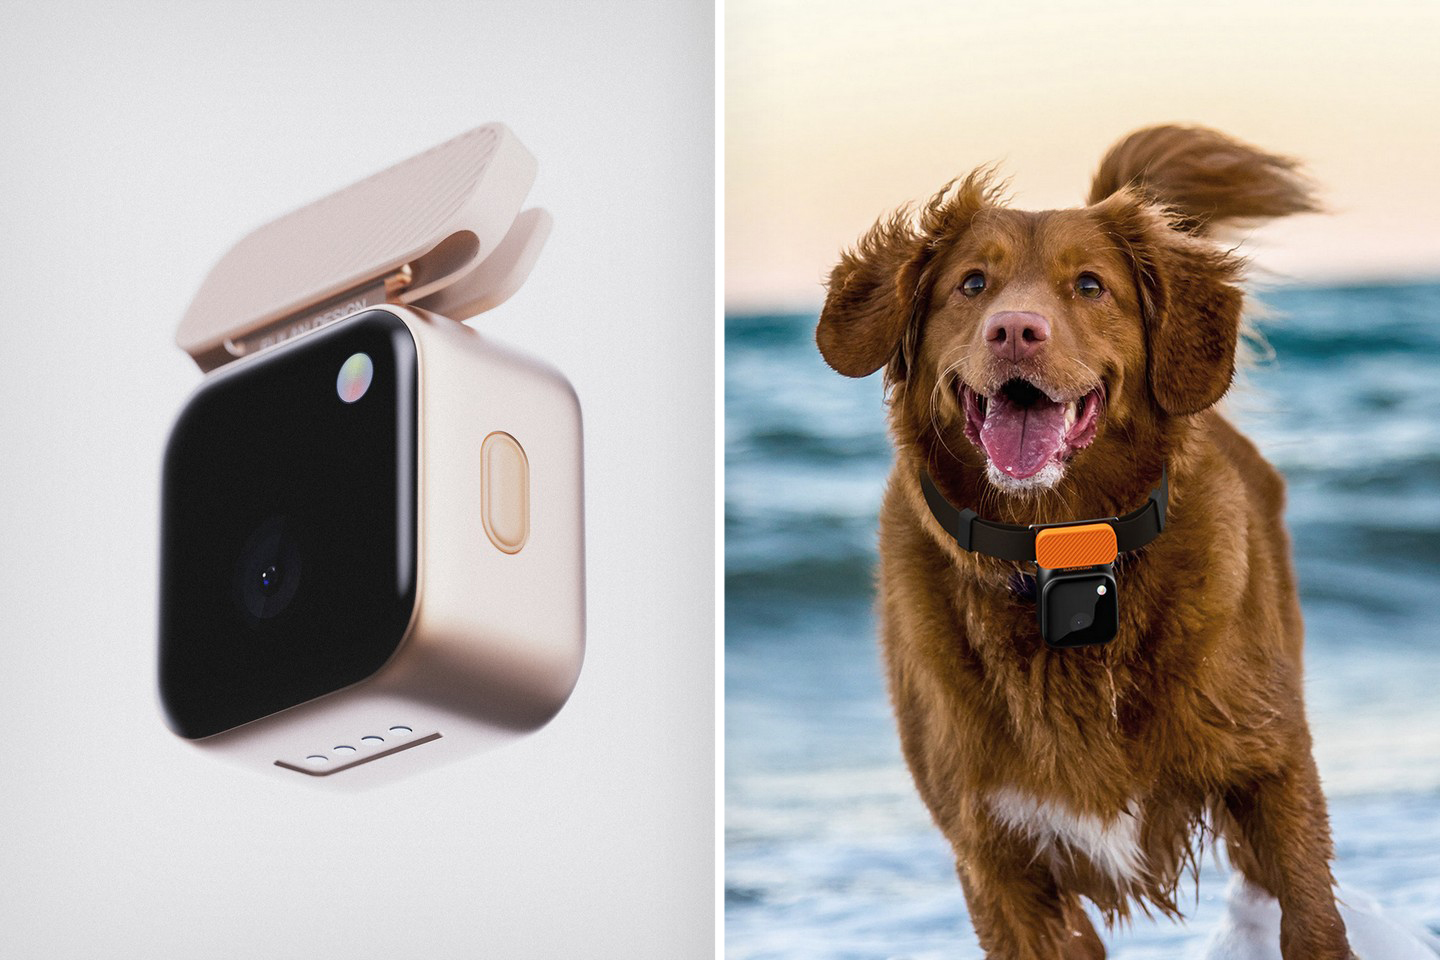 #Action camera for your pet comes with built-in clip that fixes onto any collar